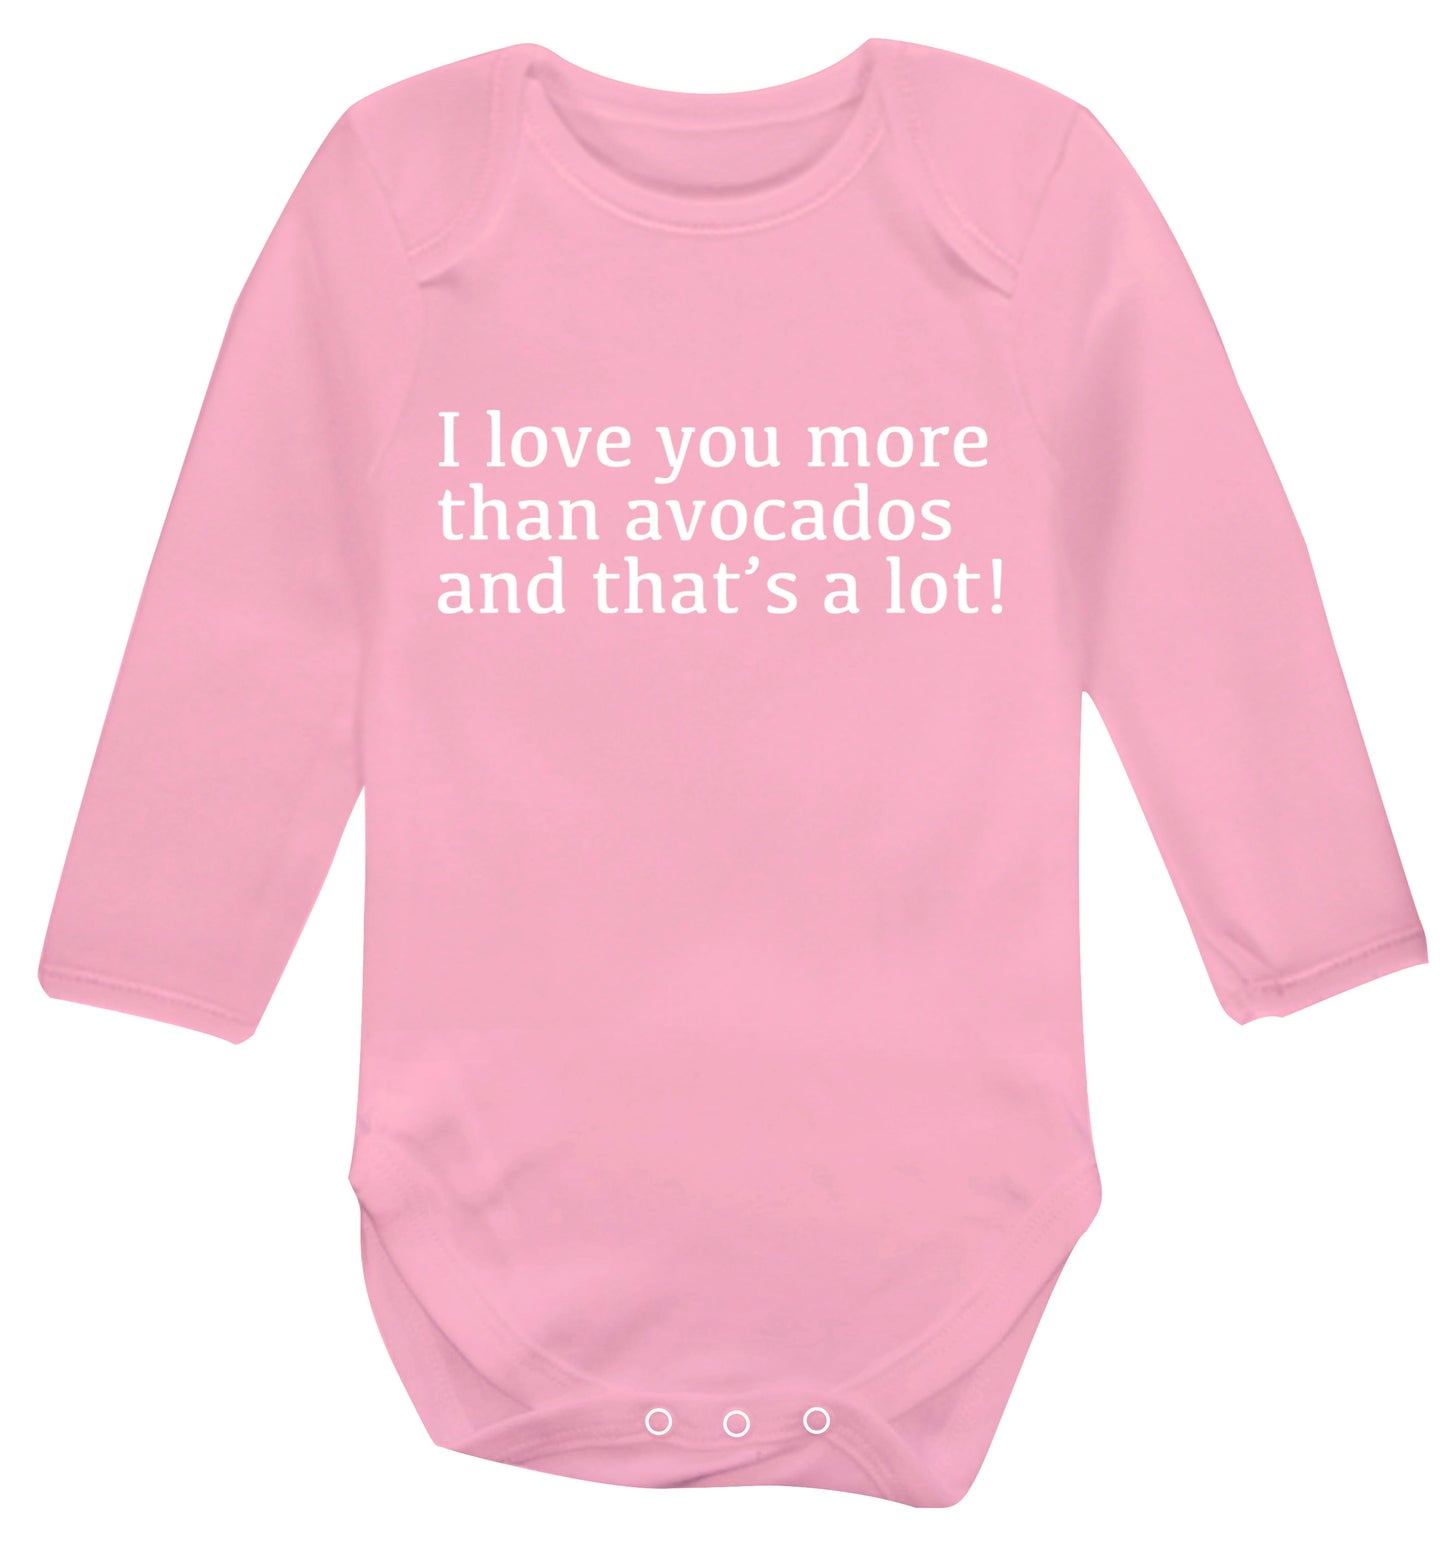 I love you more than avocados and that's a lot Baby Vest long sleeved pale pink 6-12 months